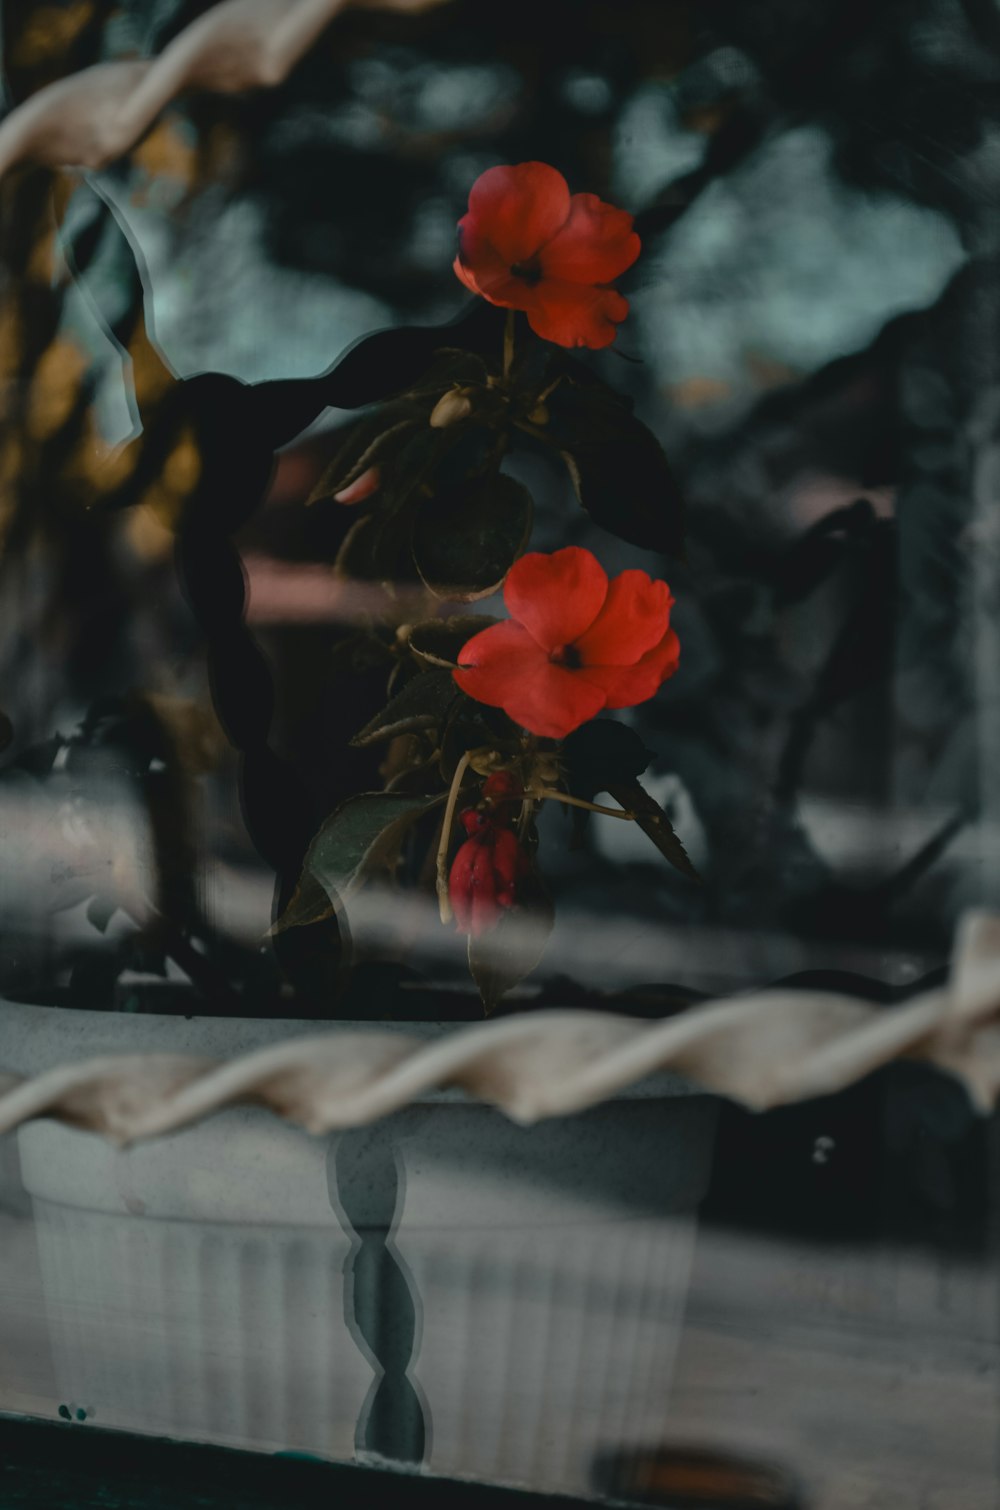 a potted plant with red flowers sitting in front of a window